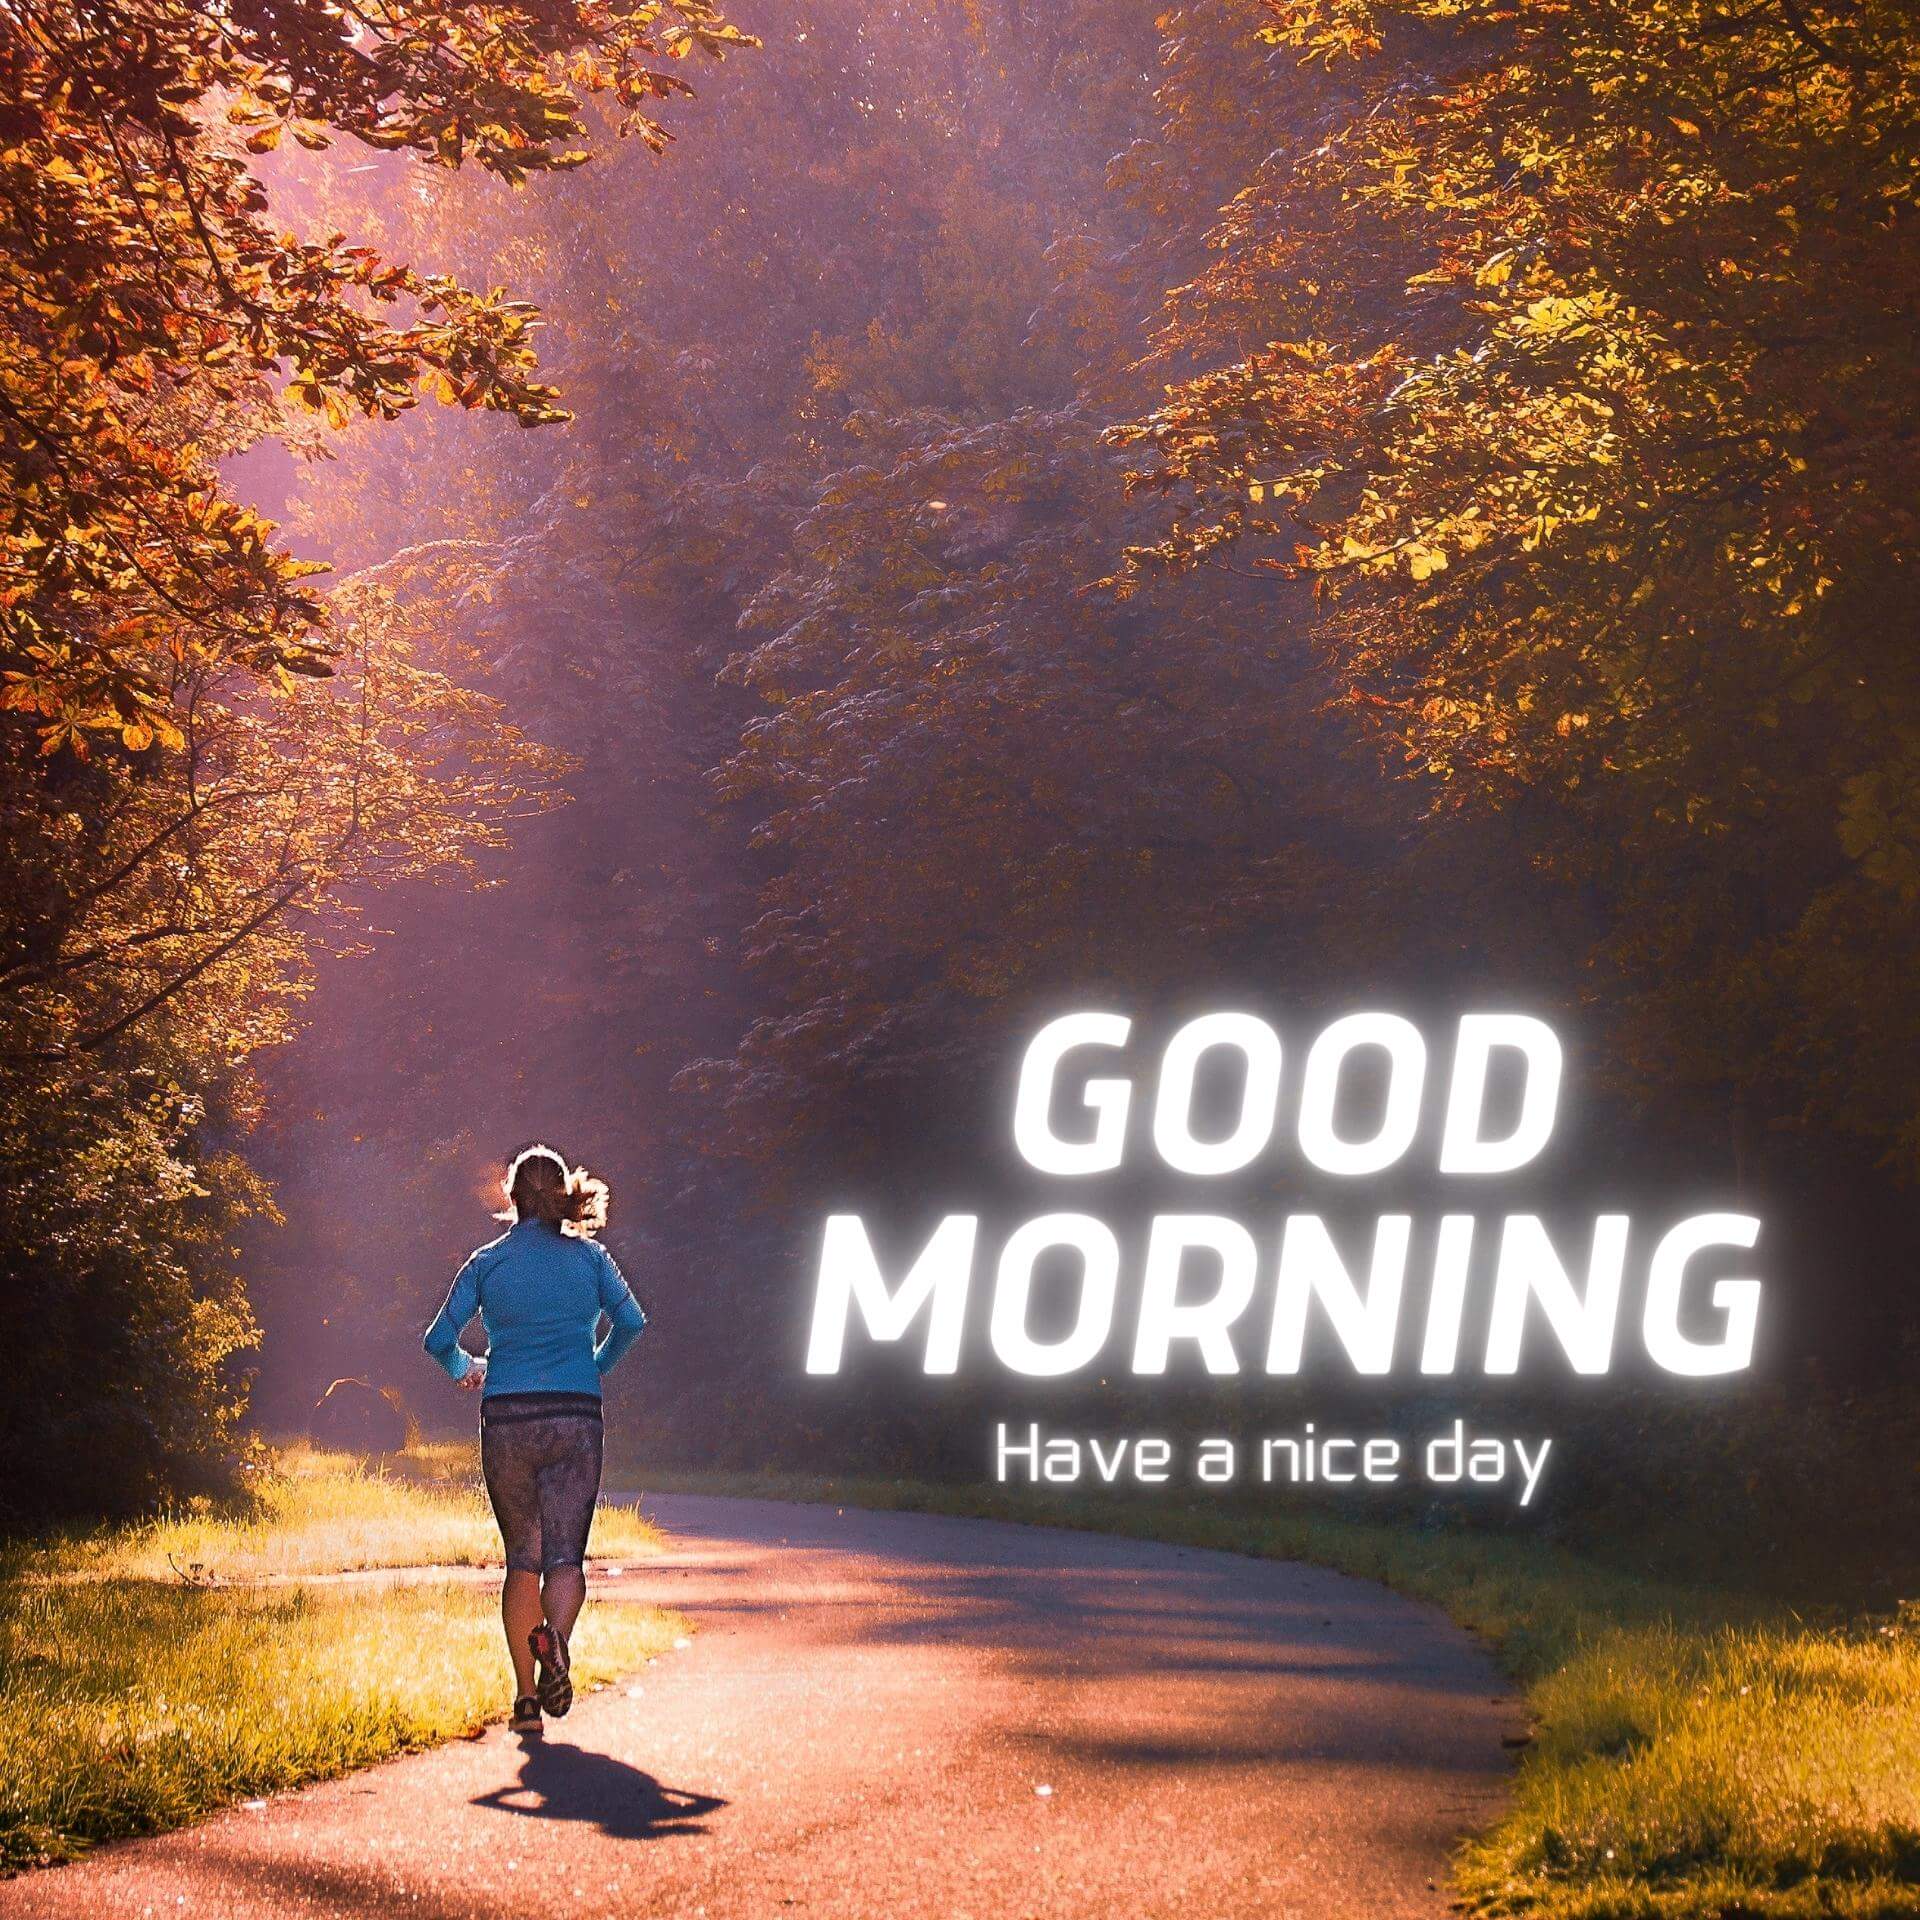 Good Morning Pics pictures Free Download